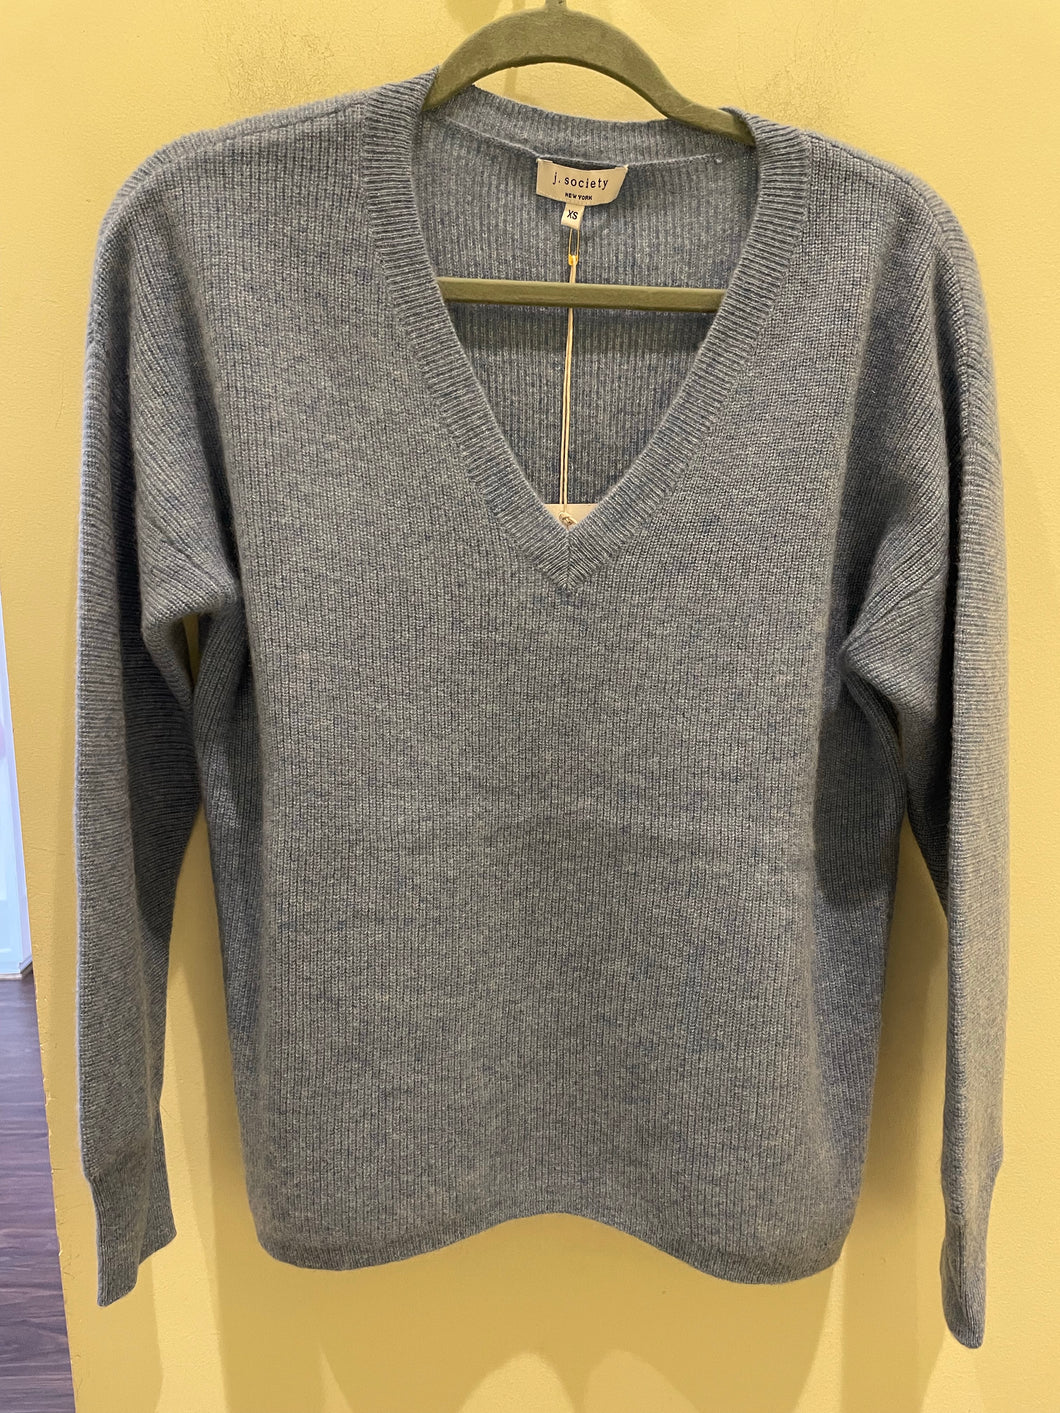 Cashmere V-Neck Sweater in Chambray by J Society